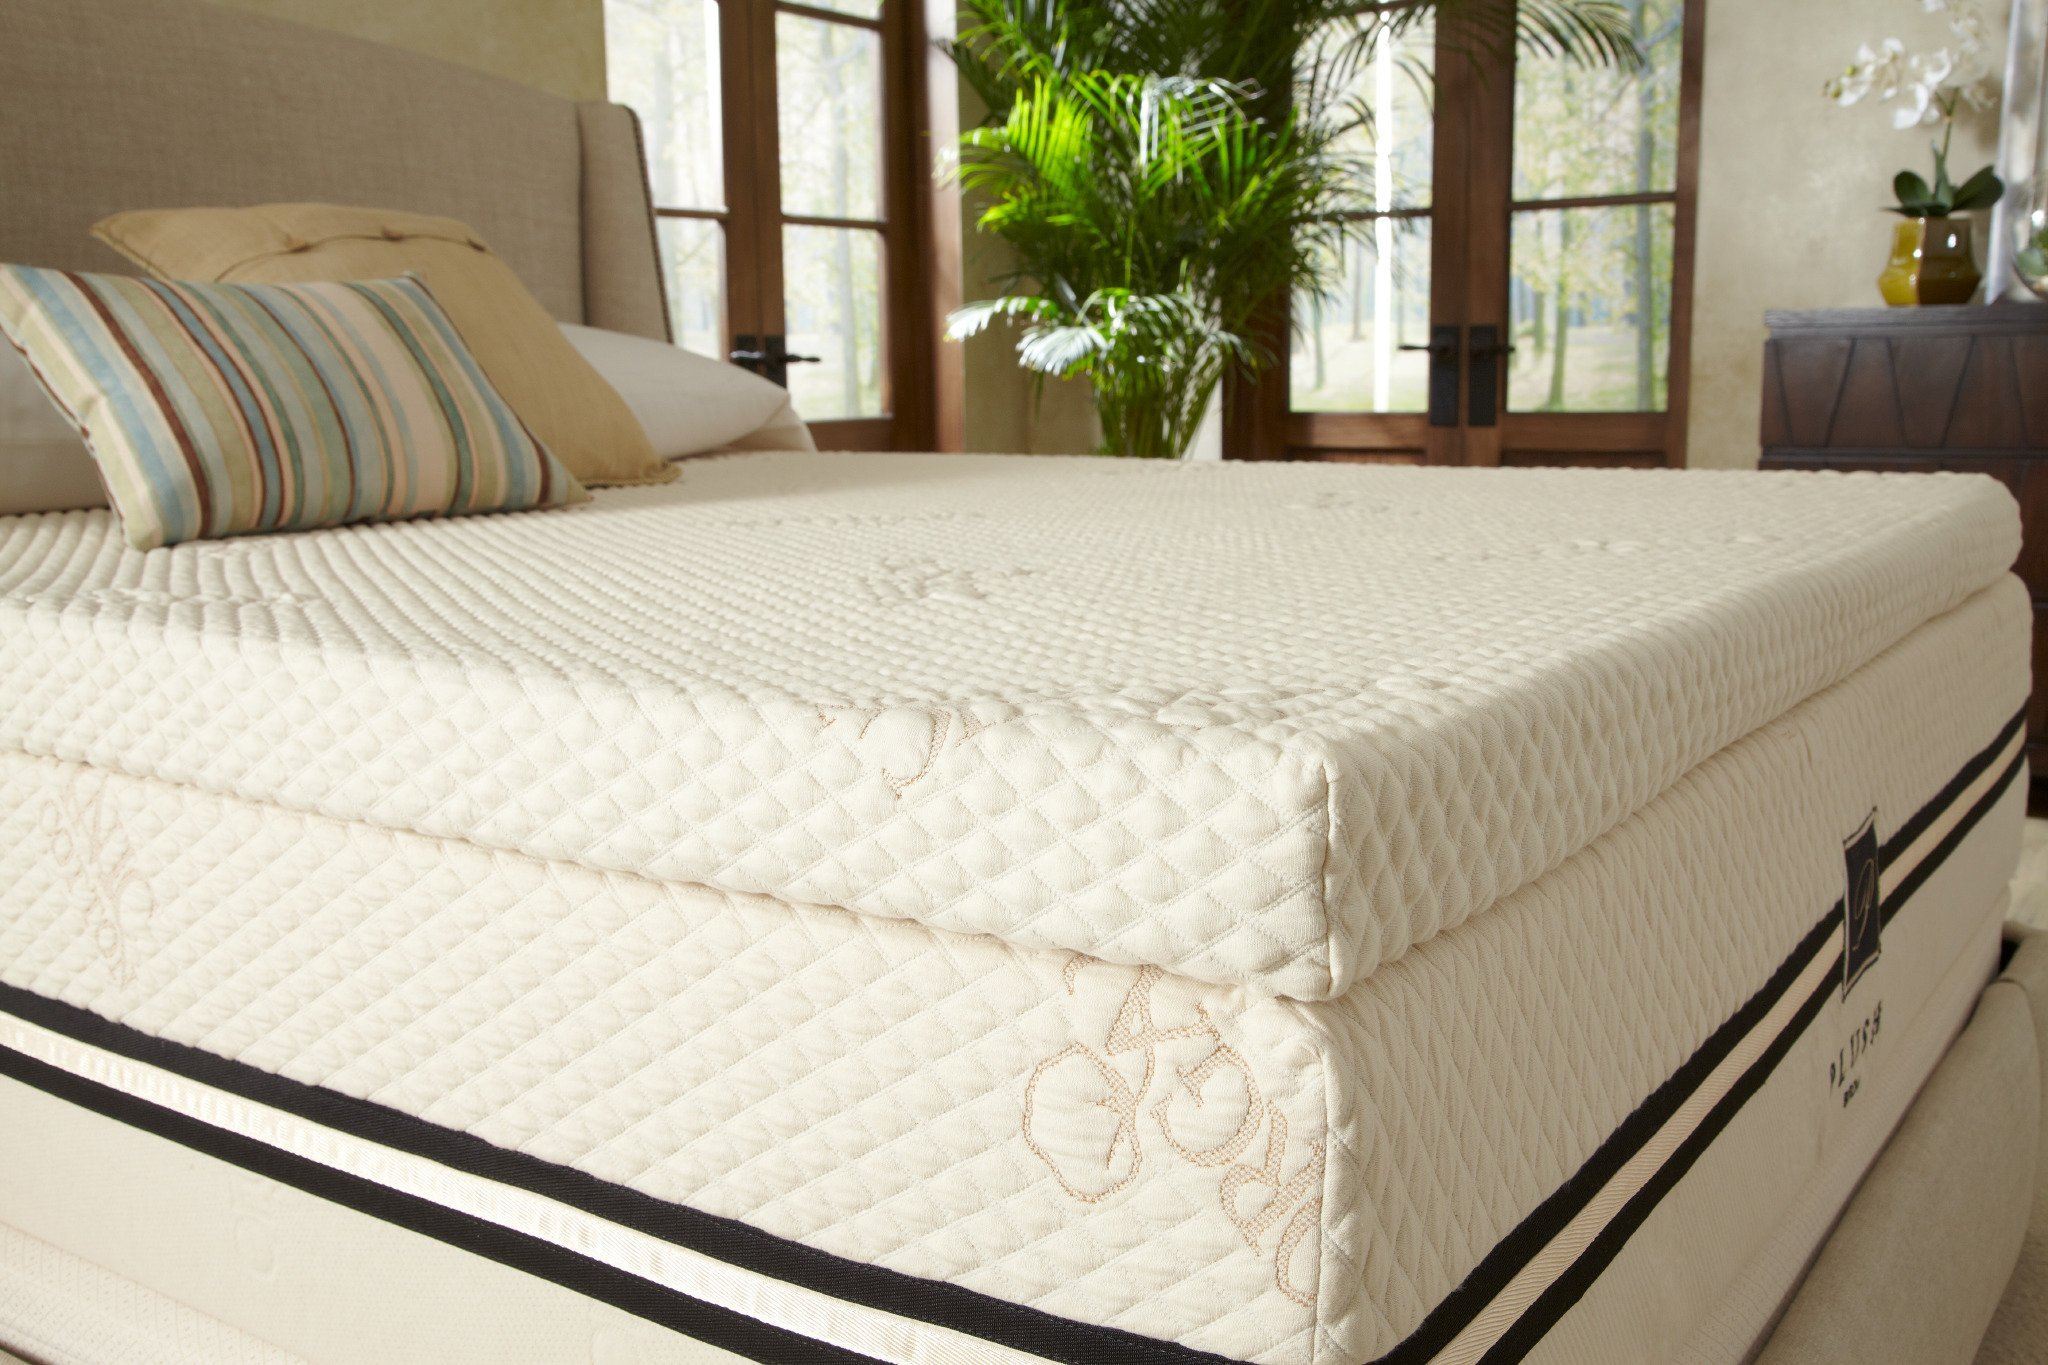 How to Install a Mattress Topper